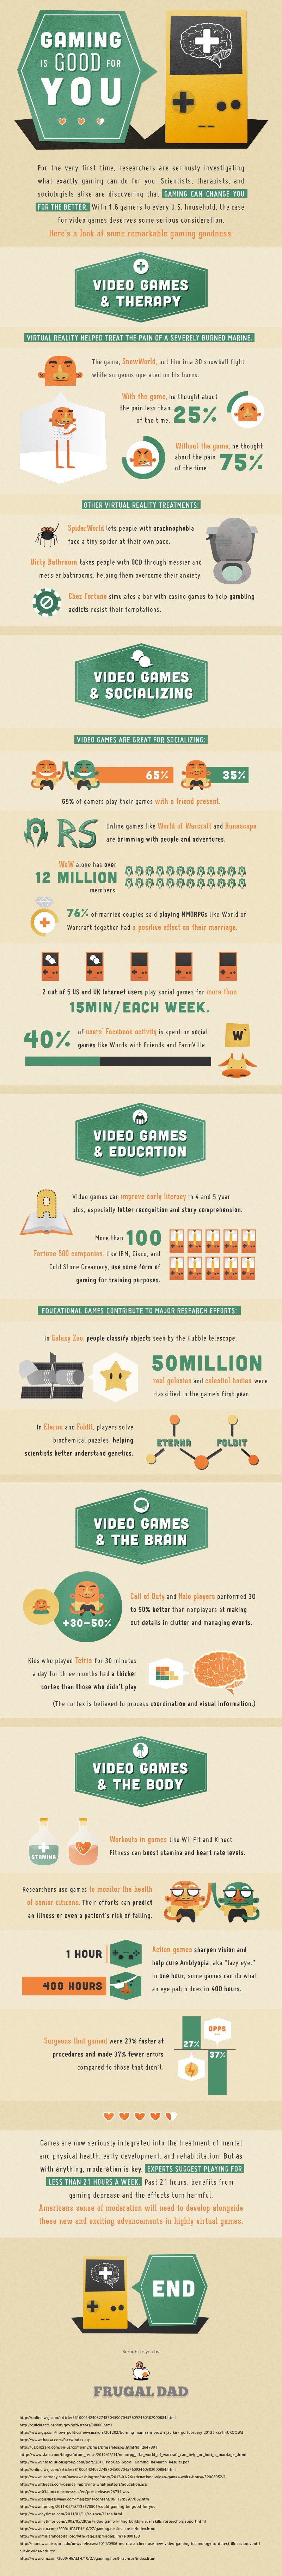 The Benefits of Gaming Infographic